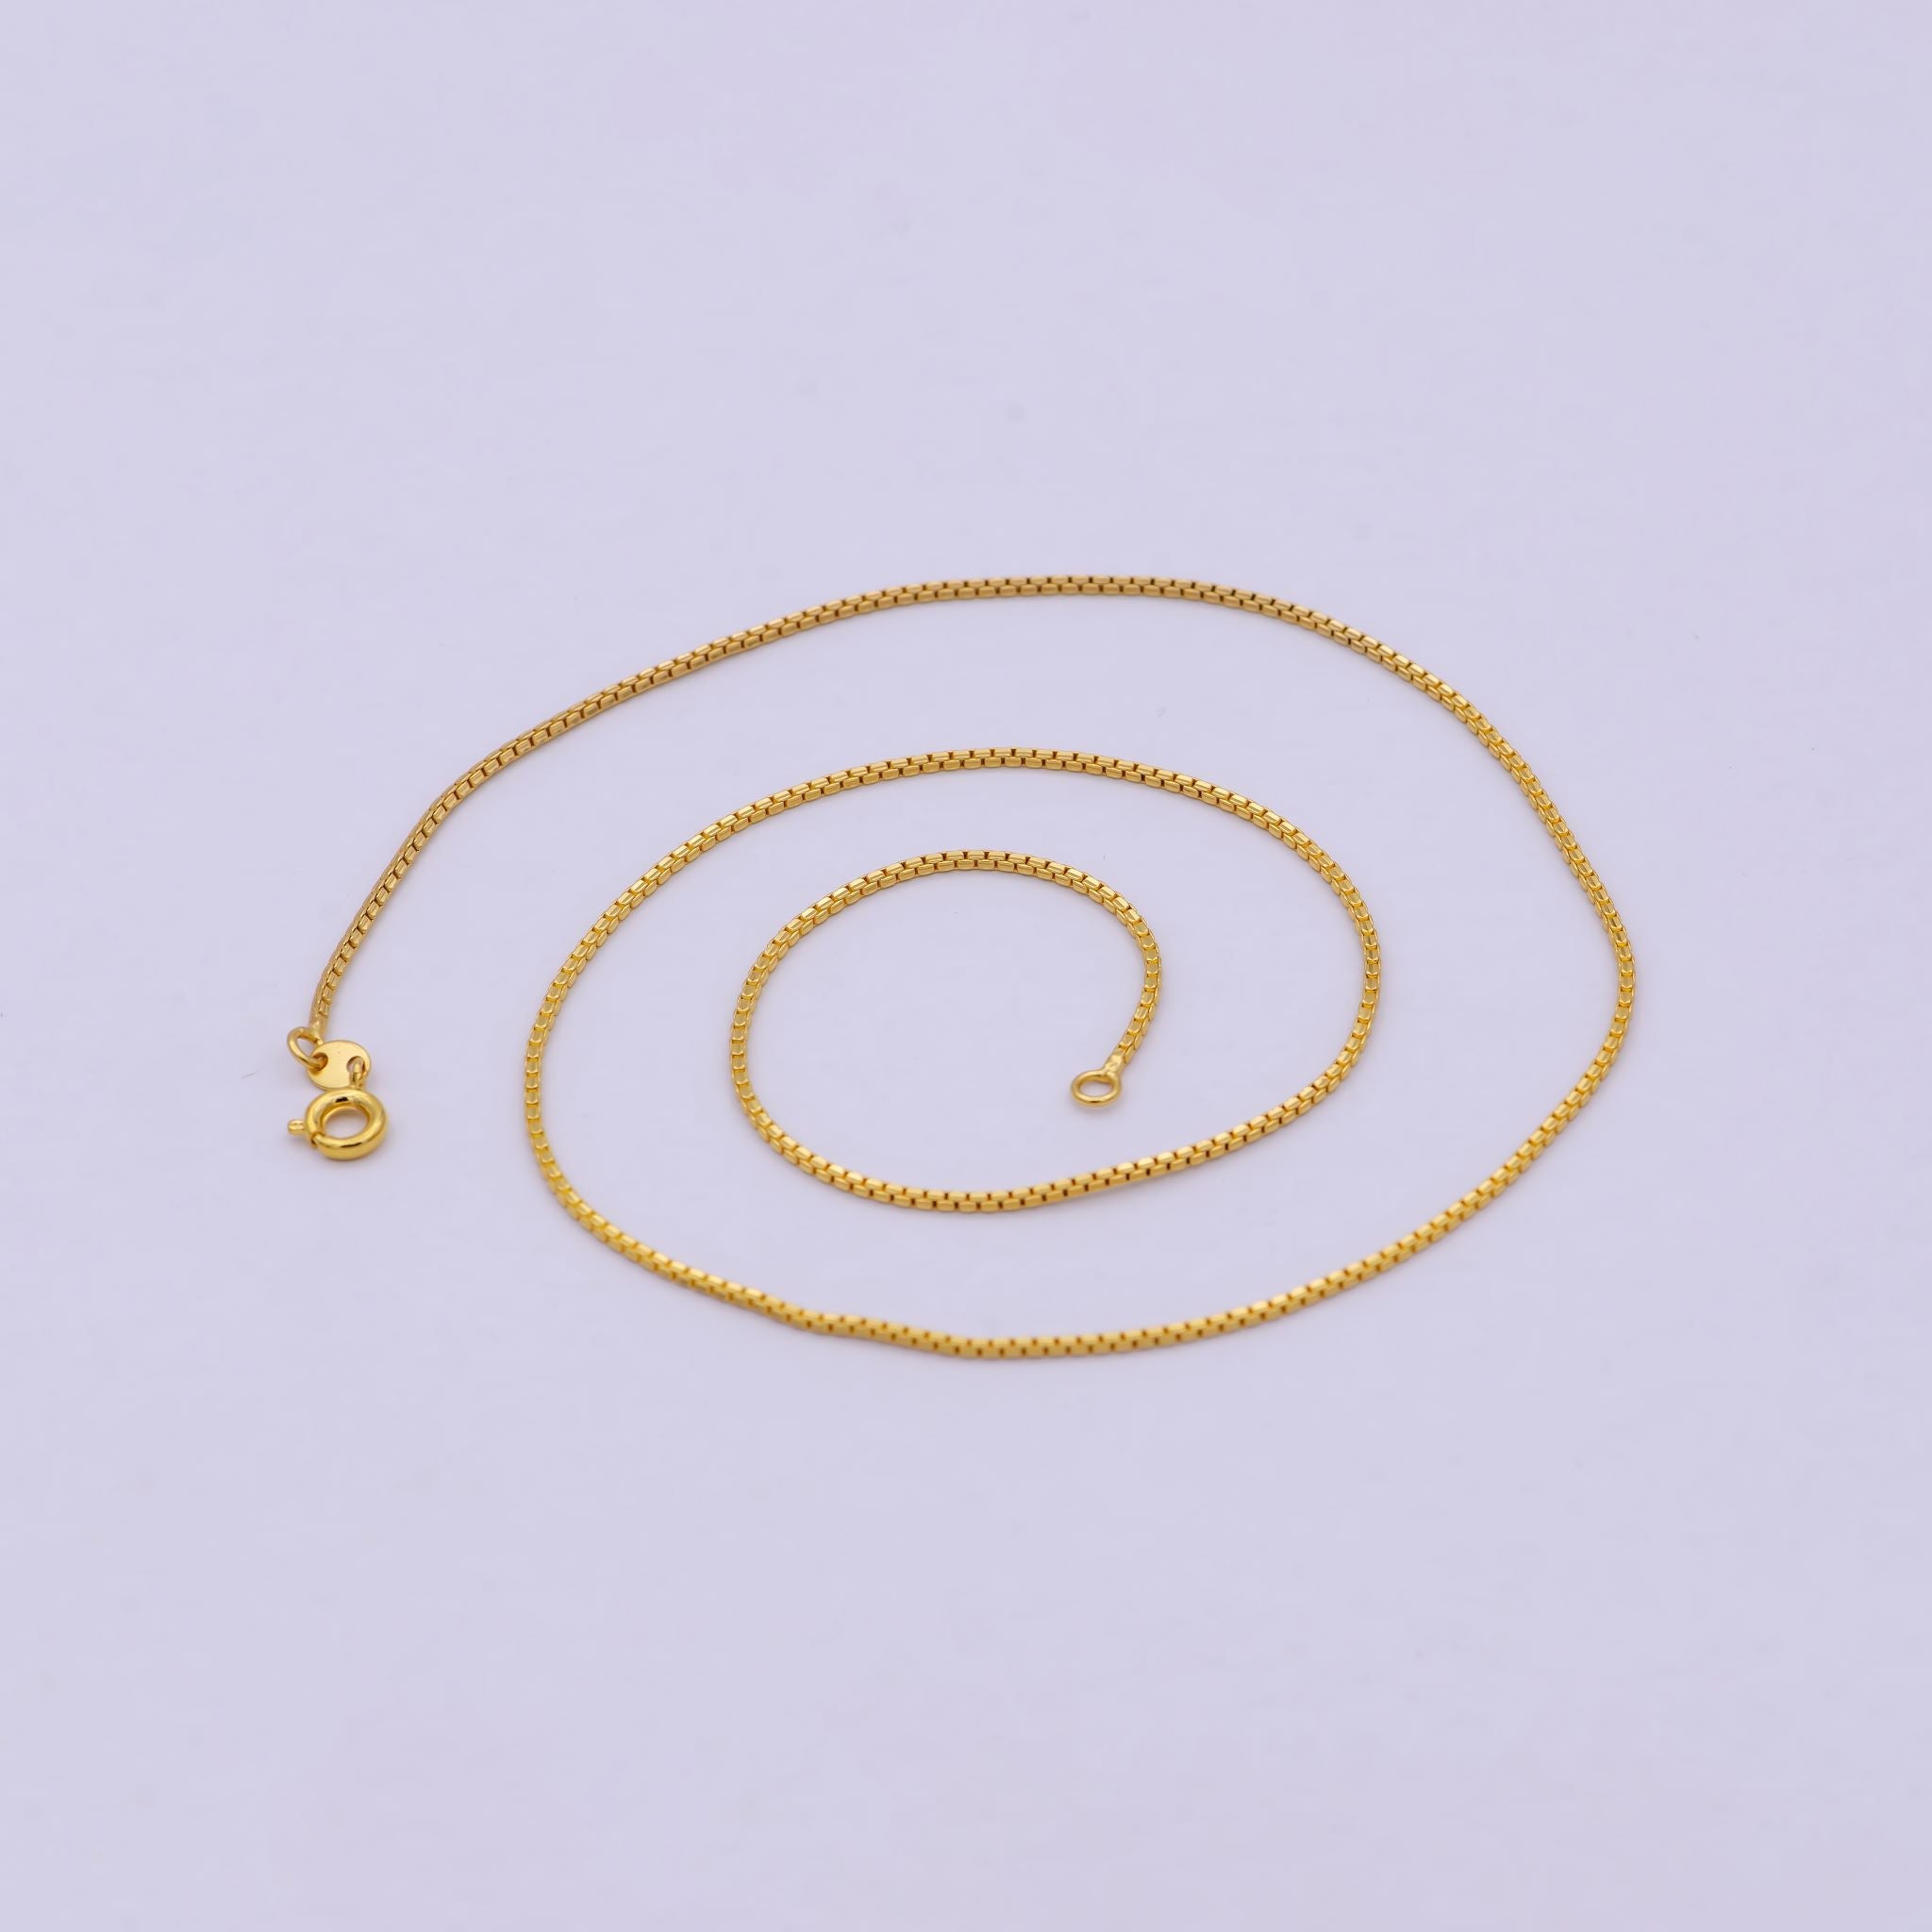 17.7 Inch Box Finished Chain, Dainty 1.1mm 24K Gold Plated Box Necklace with Spring Ring WA-624 - DLUXCA